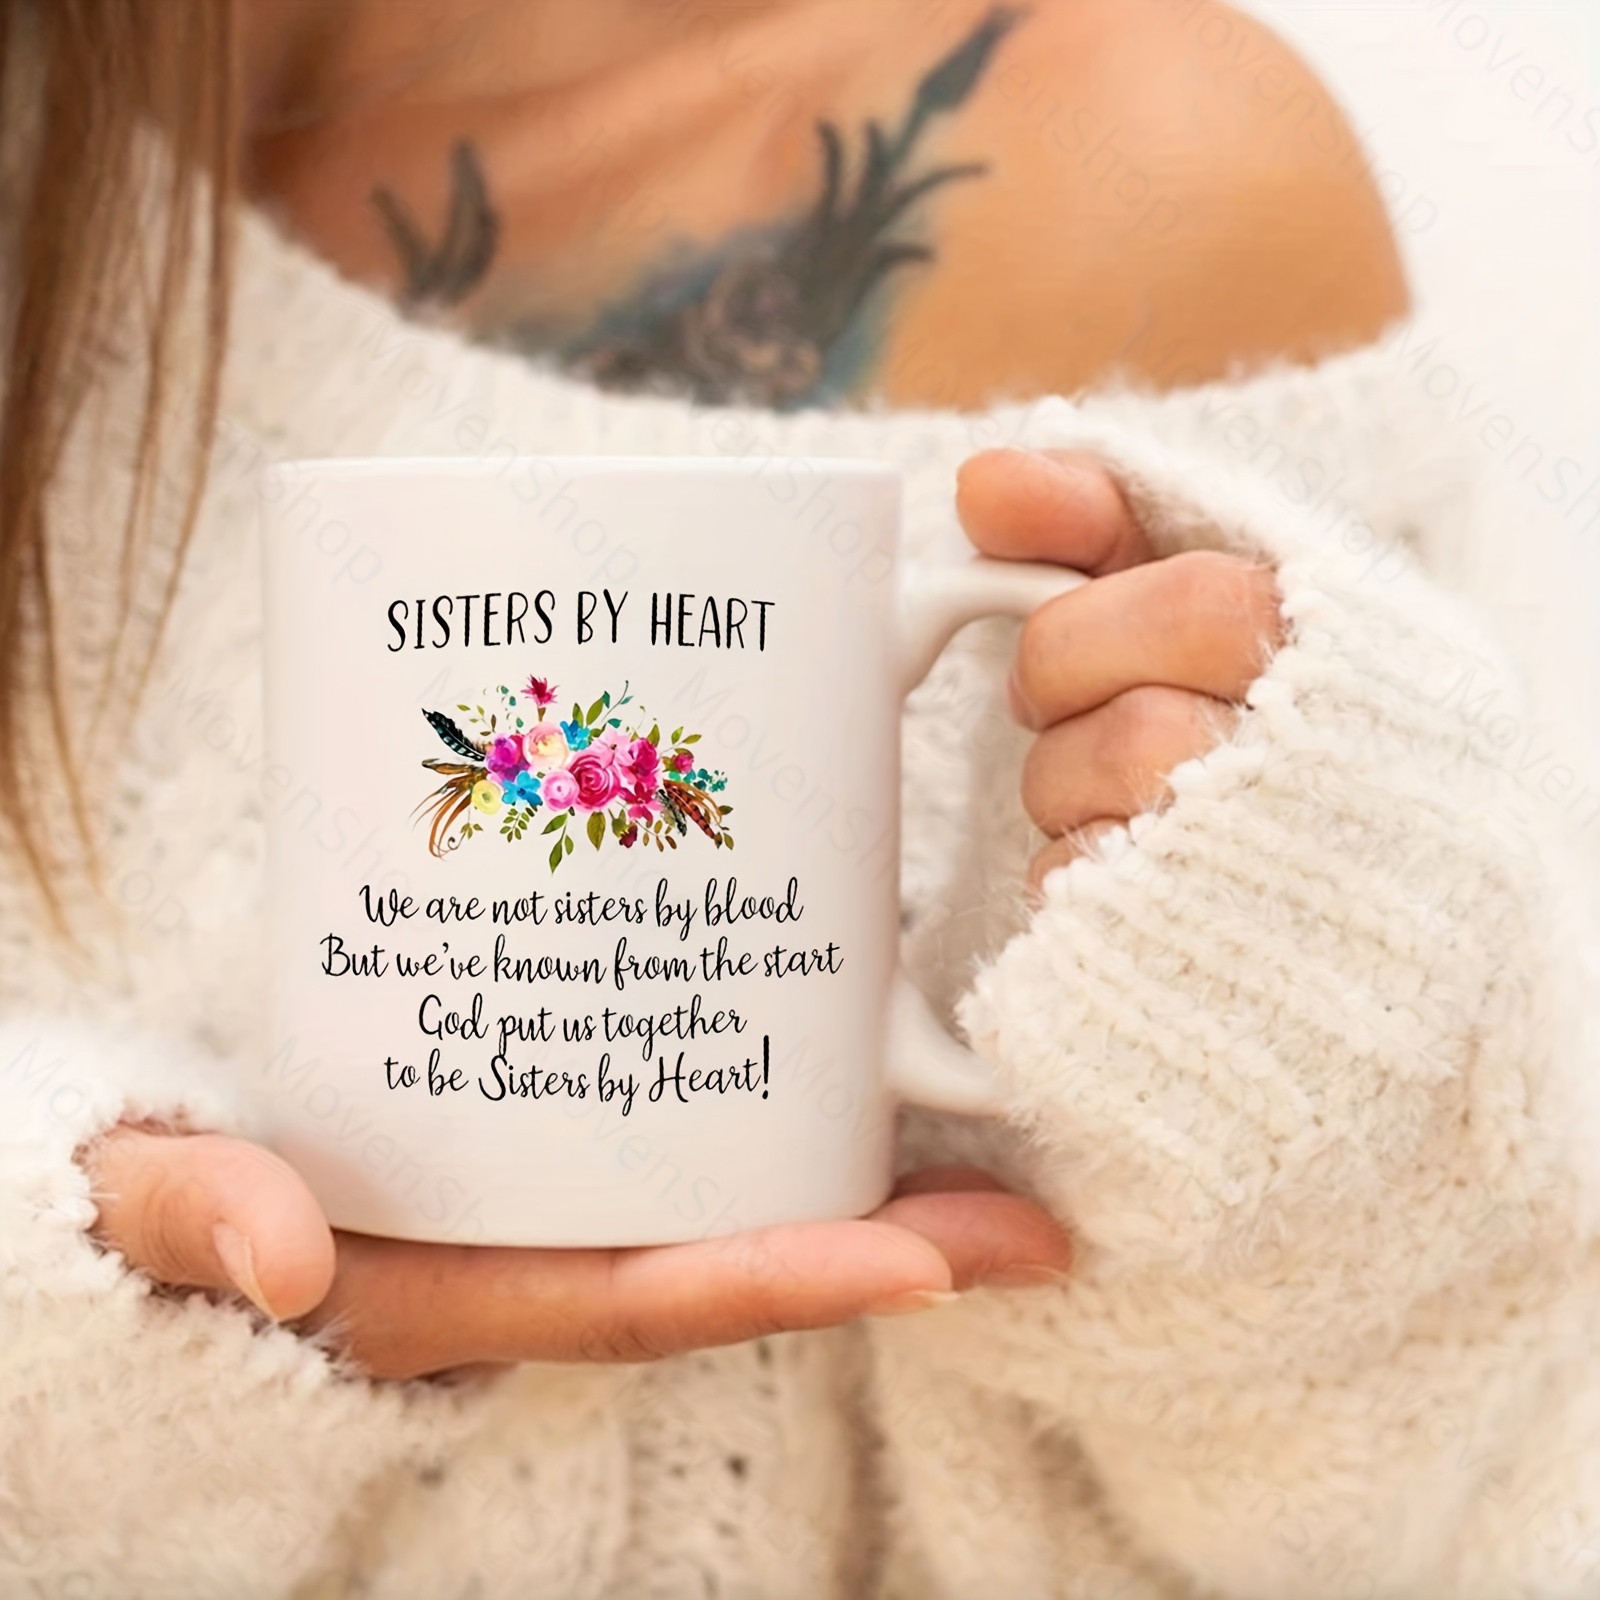 Get Not Sisters By Blood But Sisters By Heart Mug, Best Friends